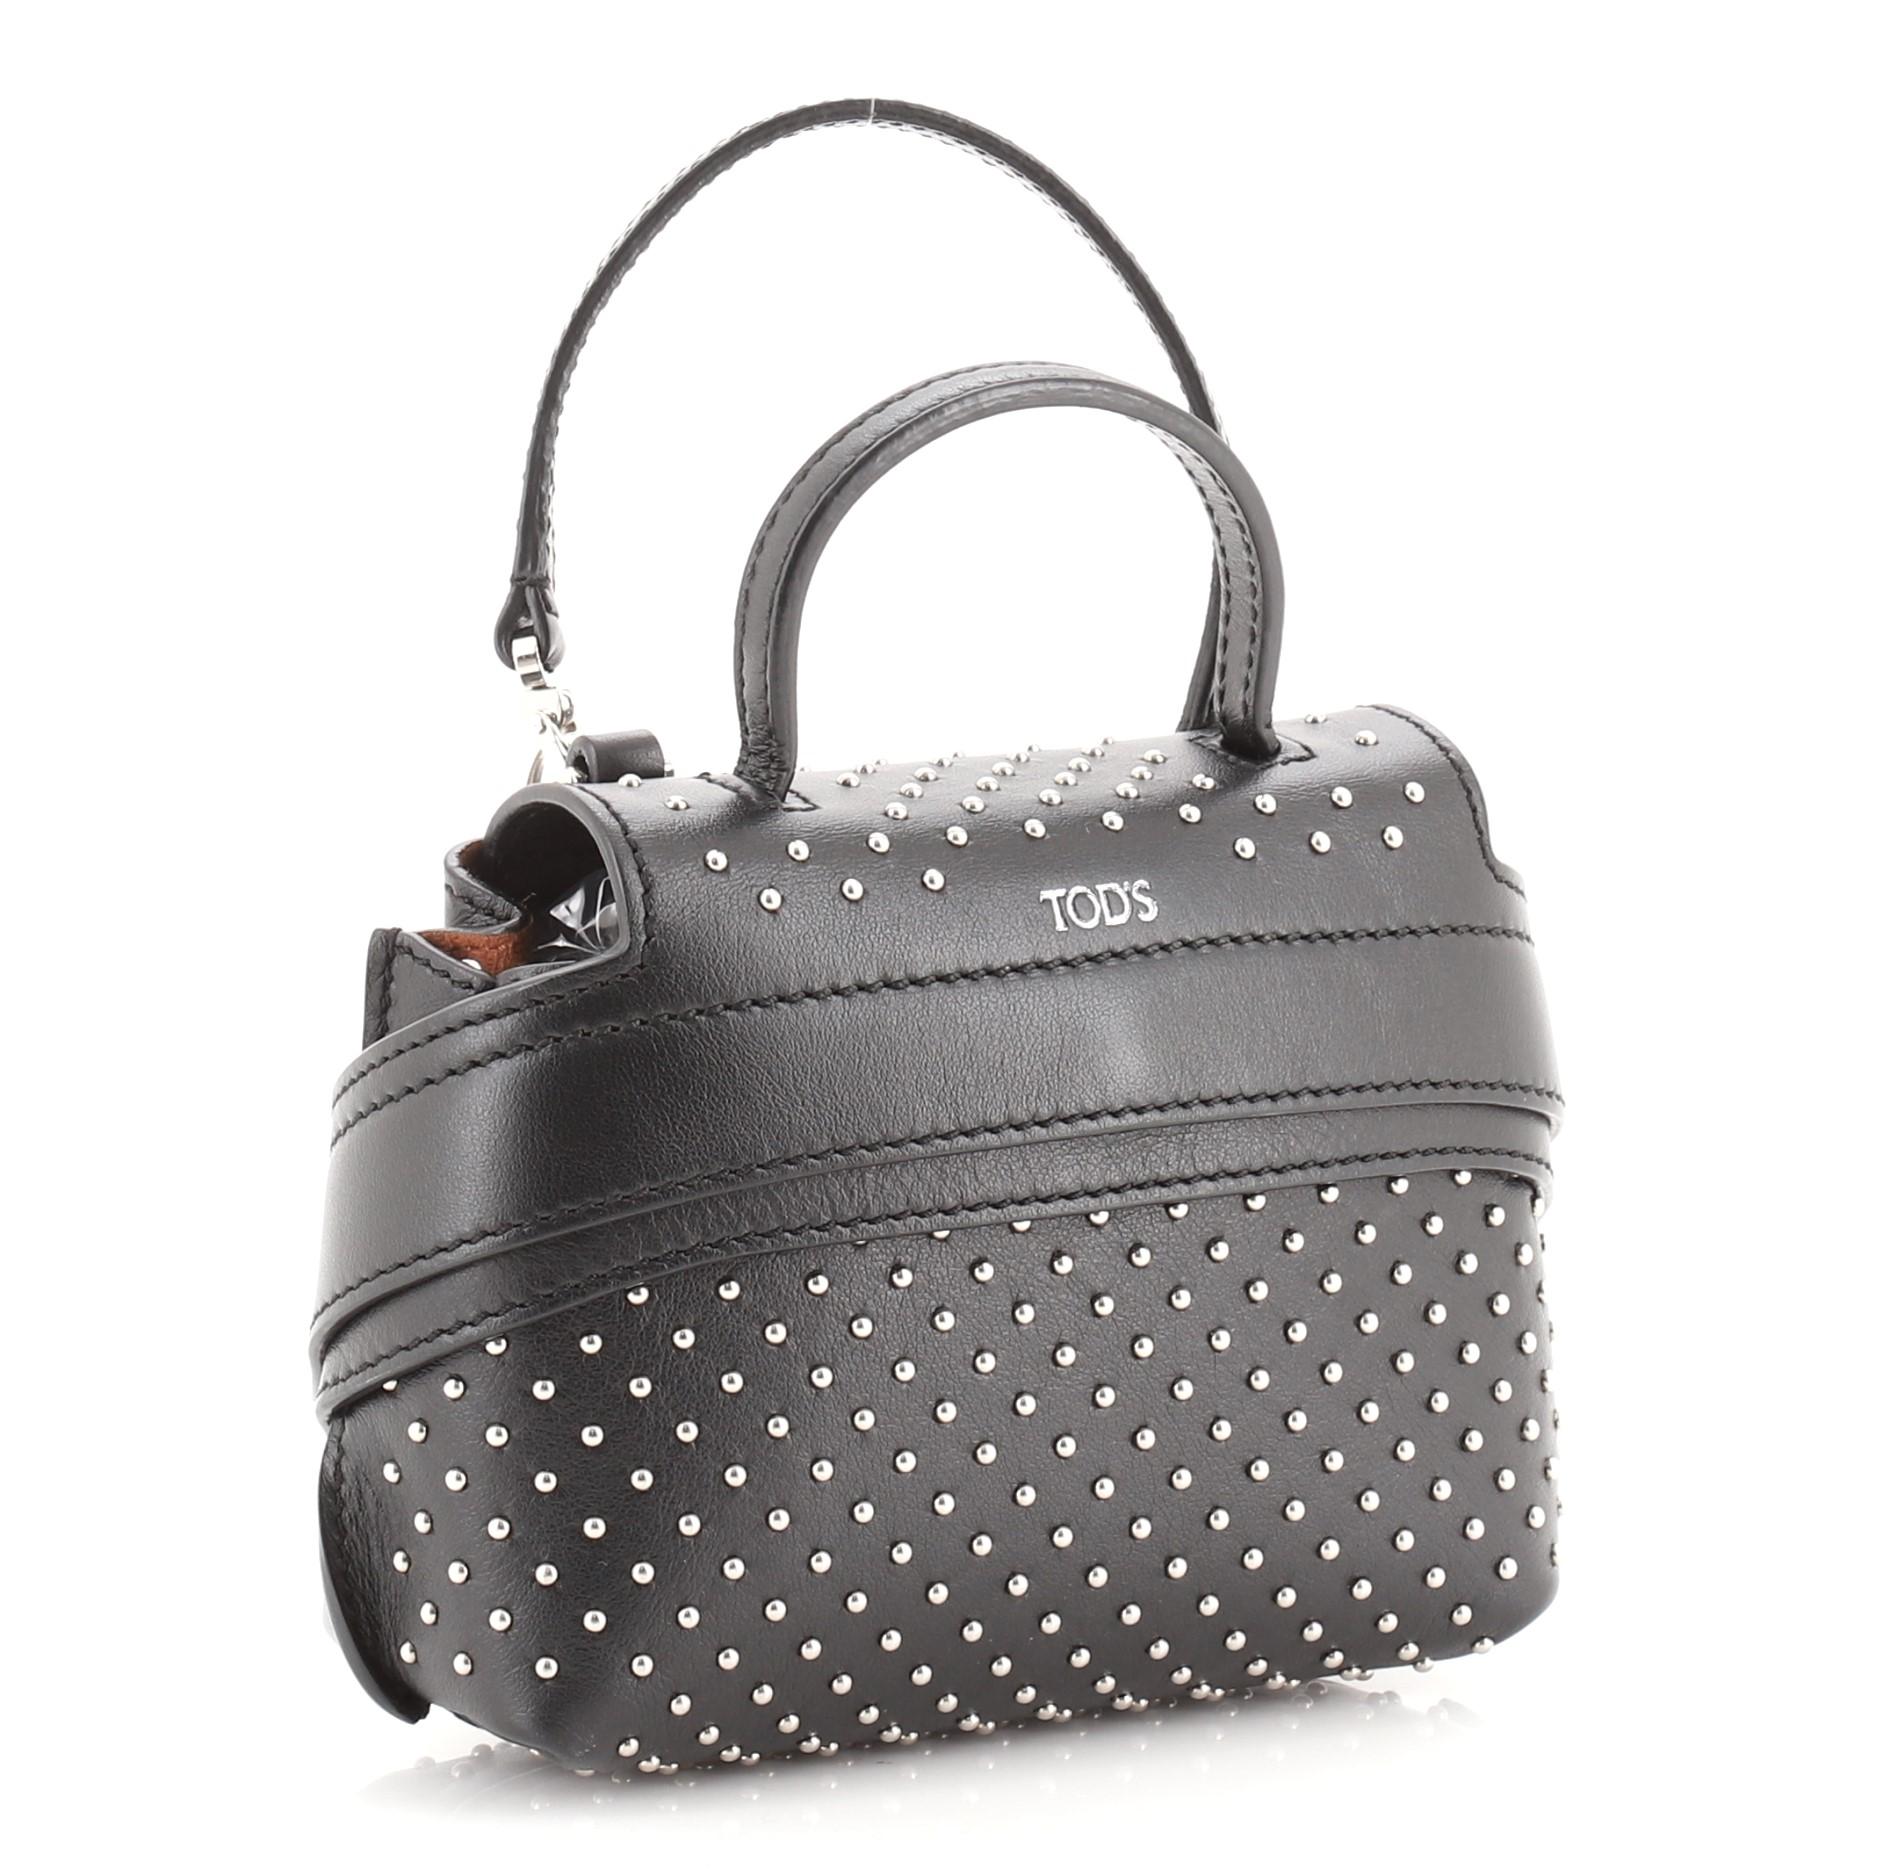 Tod's Studded Wave Charm Bag Leather
Black

Condition Details: Minor wear on exterior, handle and in interior, creasing on flap and underneath flap, scratches on hardware.

52319MSC

Height 4.5